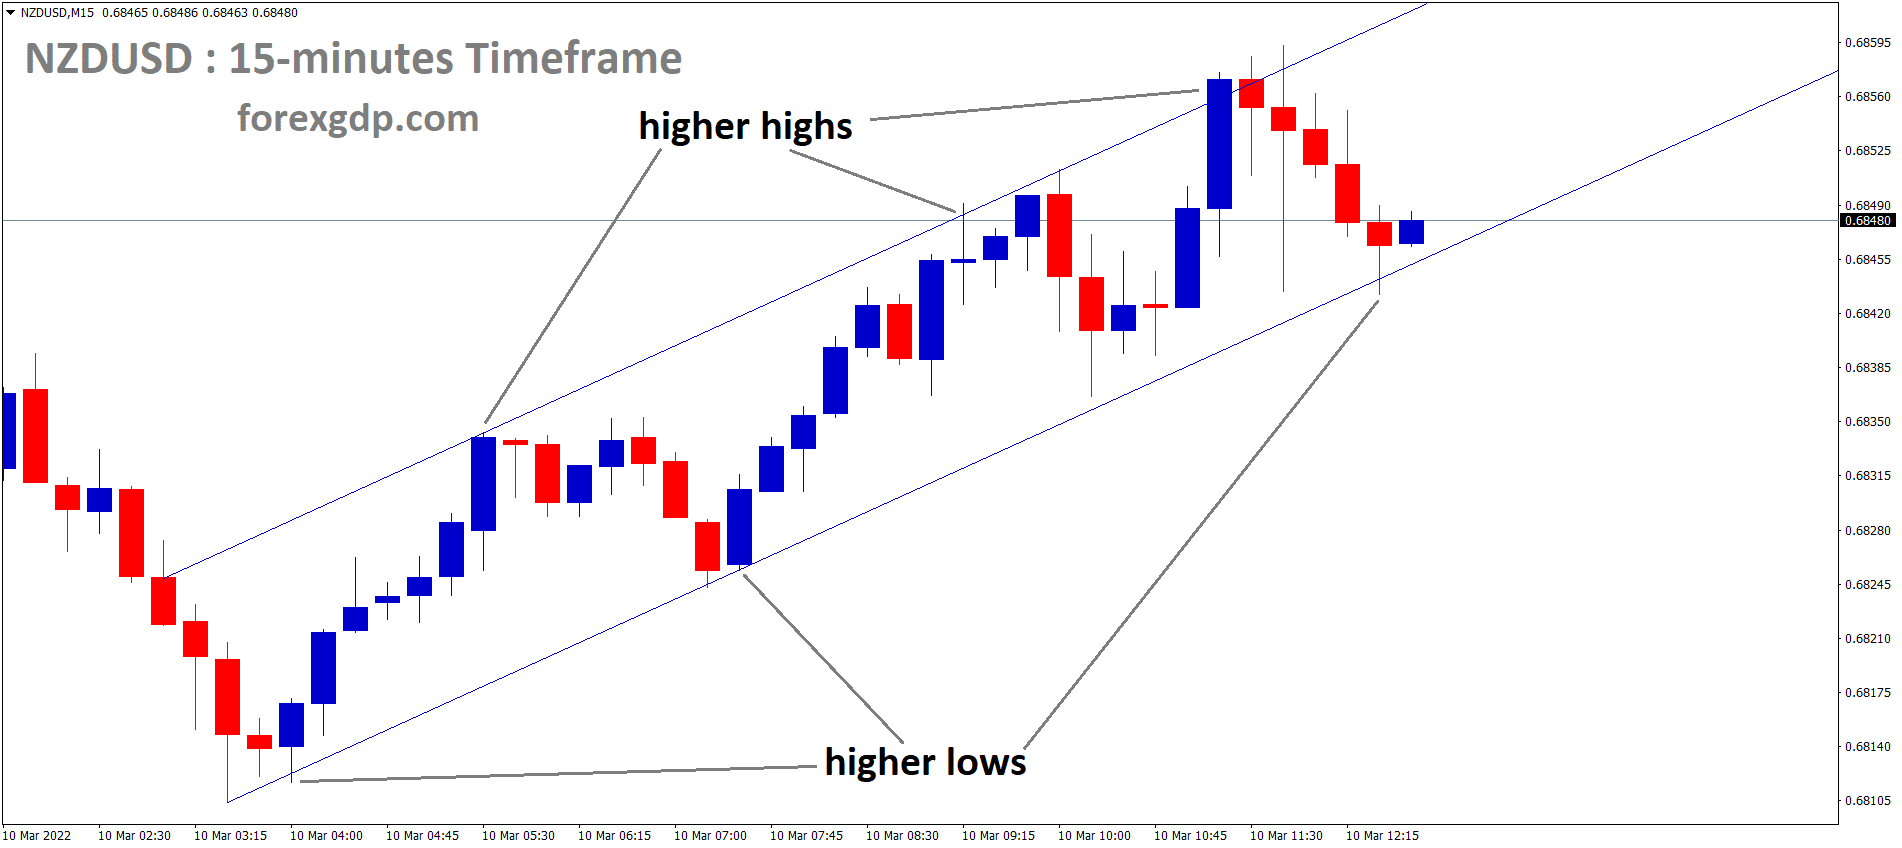 NZDUSD is moving in an Ascending channel and the market has rebounded from the higher low area of the Ascending channel